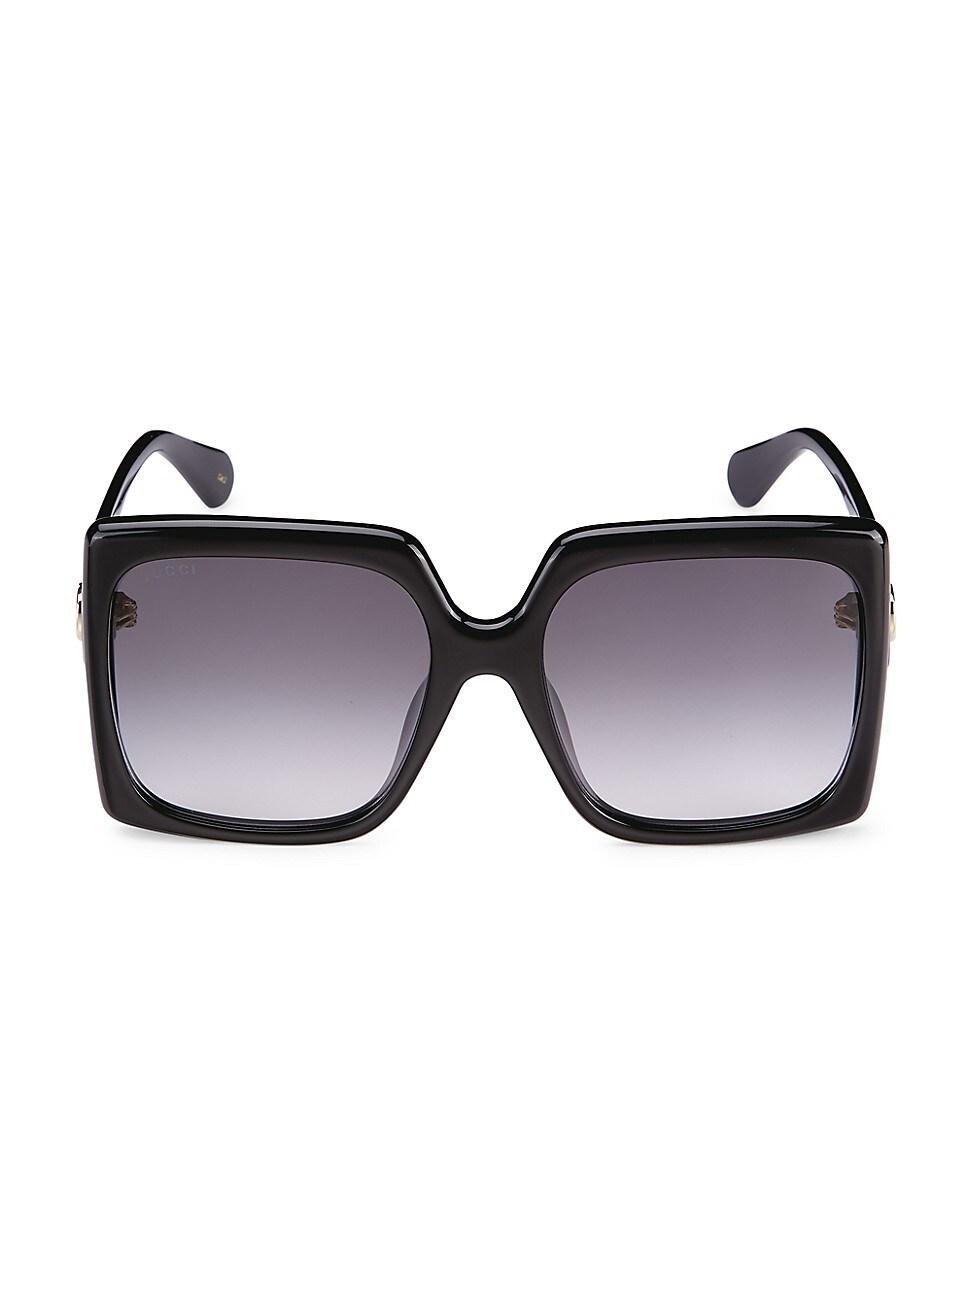 Womens Gucci Logo 59MM Oversized Square Sunglasses Product Image